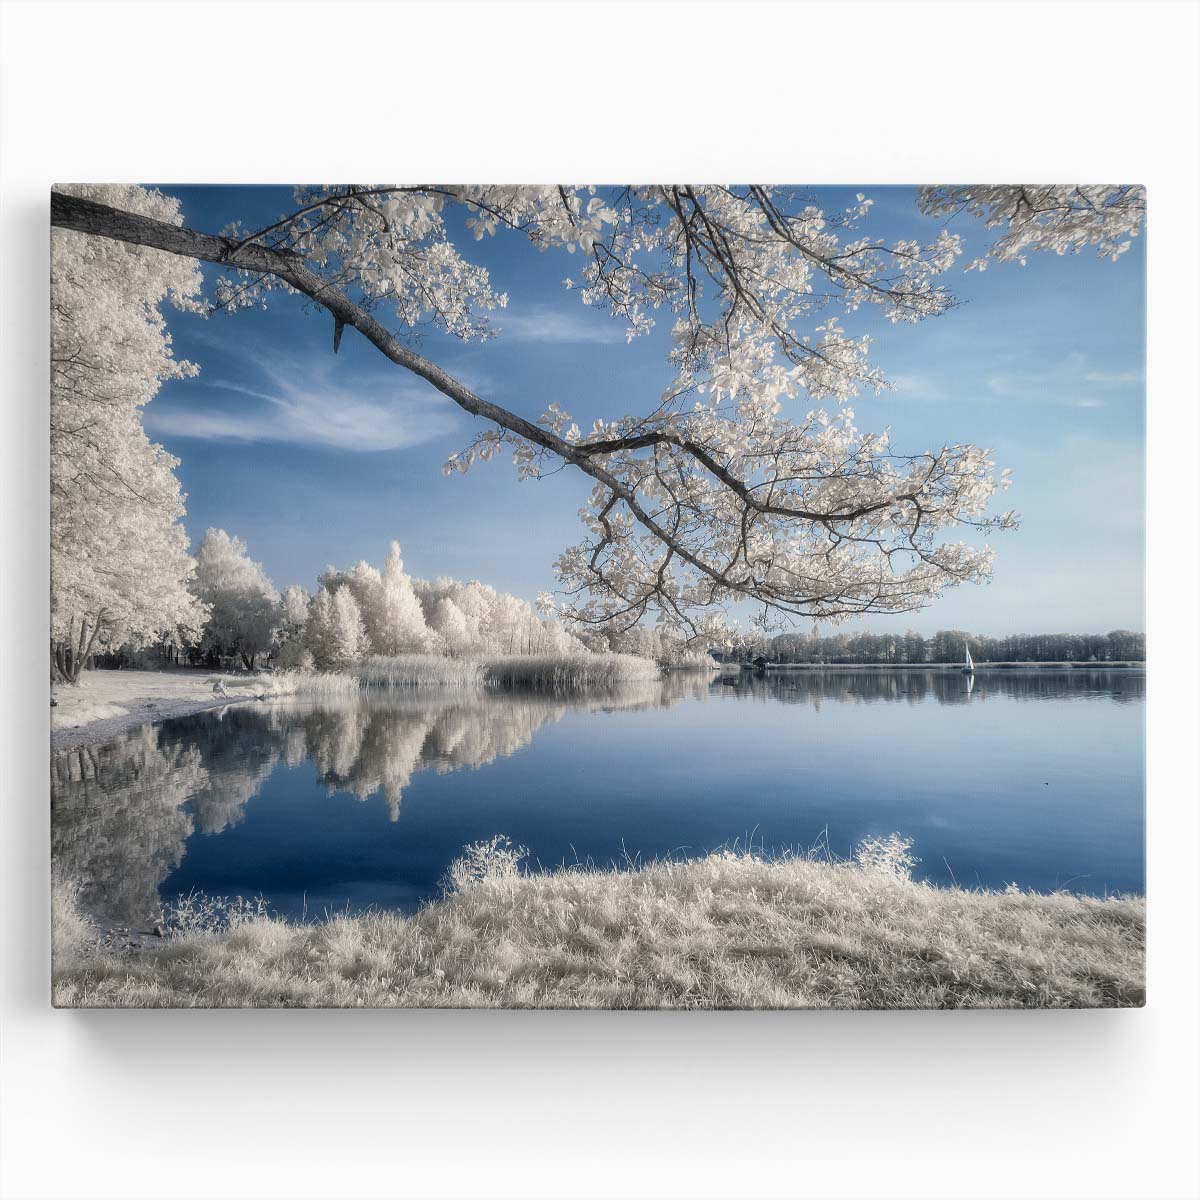 Serene Zdworskie Lake Reflection Wall Art by Luxuriance Designs. Made in USA.